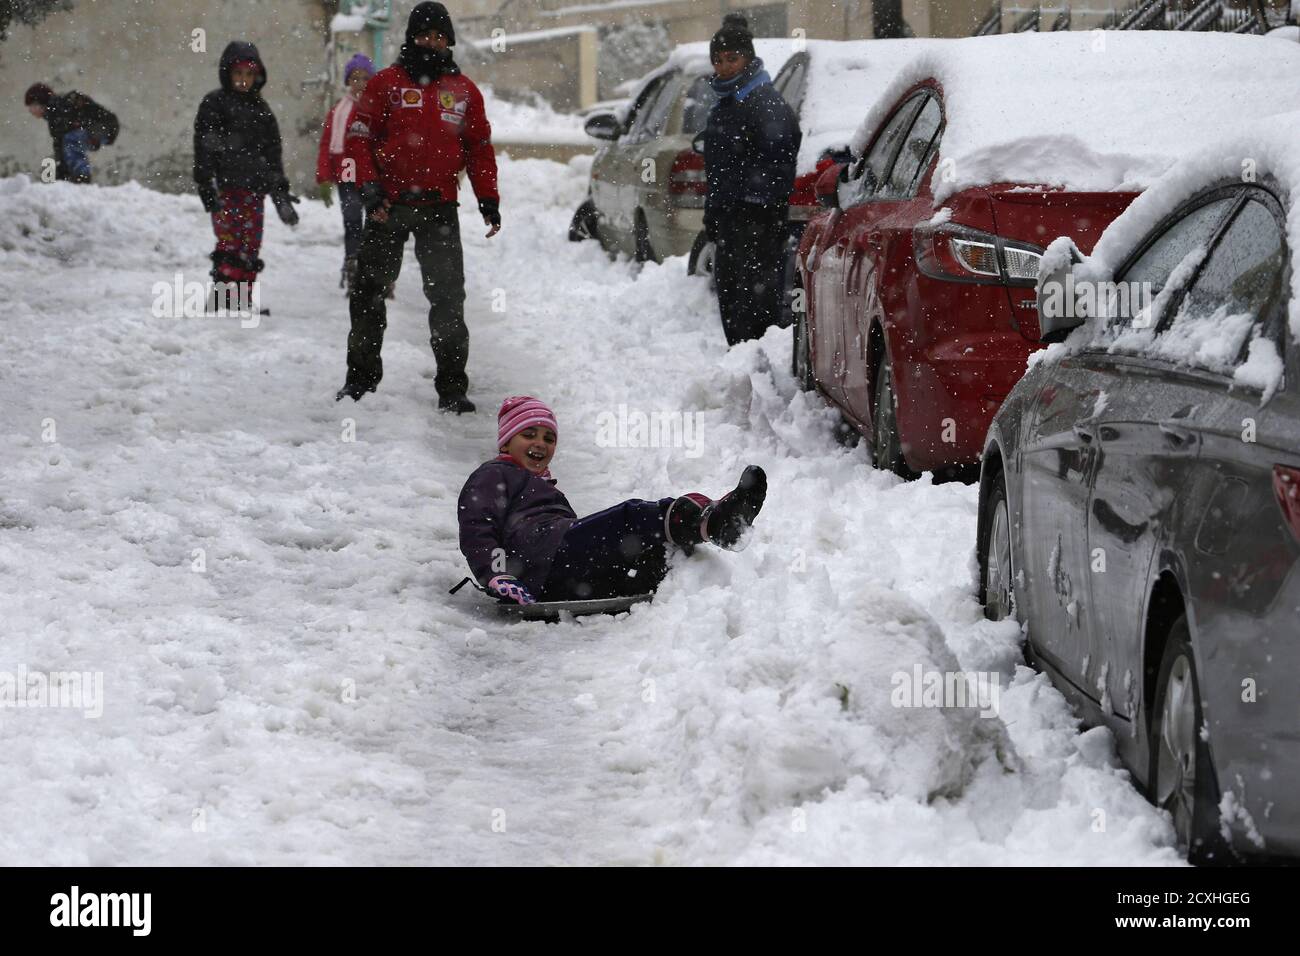 Children play with snow during a heavy snowstorm in Amman January 9, 2015.  A storm buffeted the Middle East with blizzards, rain and strong winds,  keeping people at home across much of